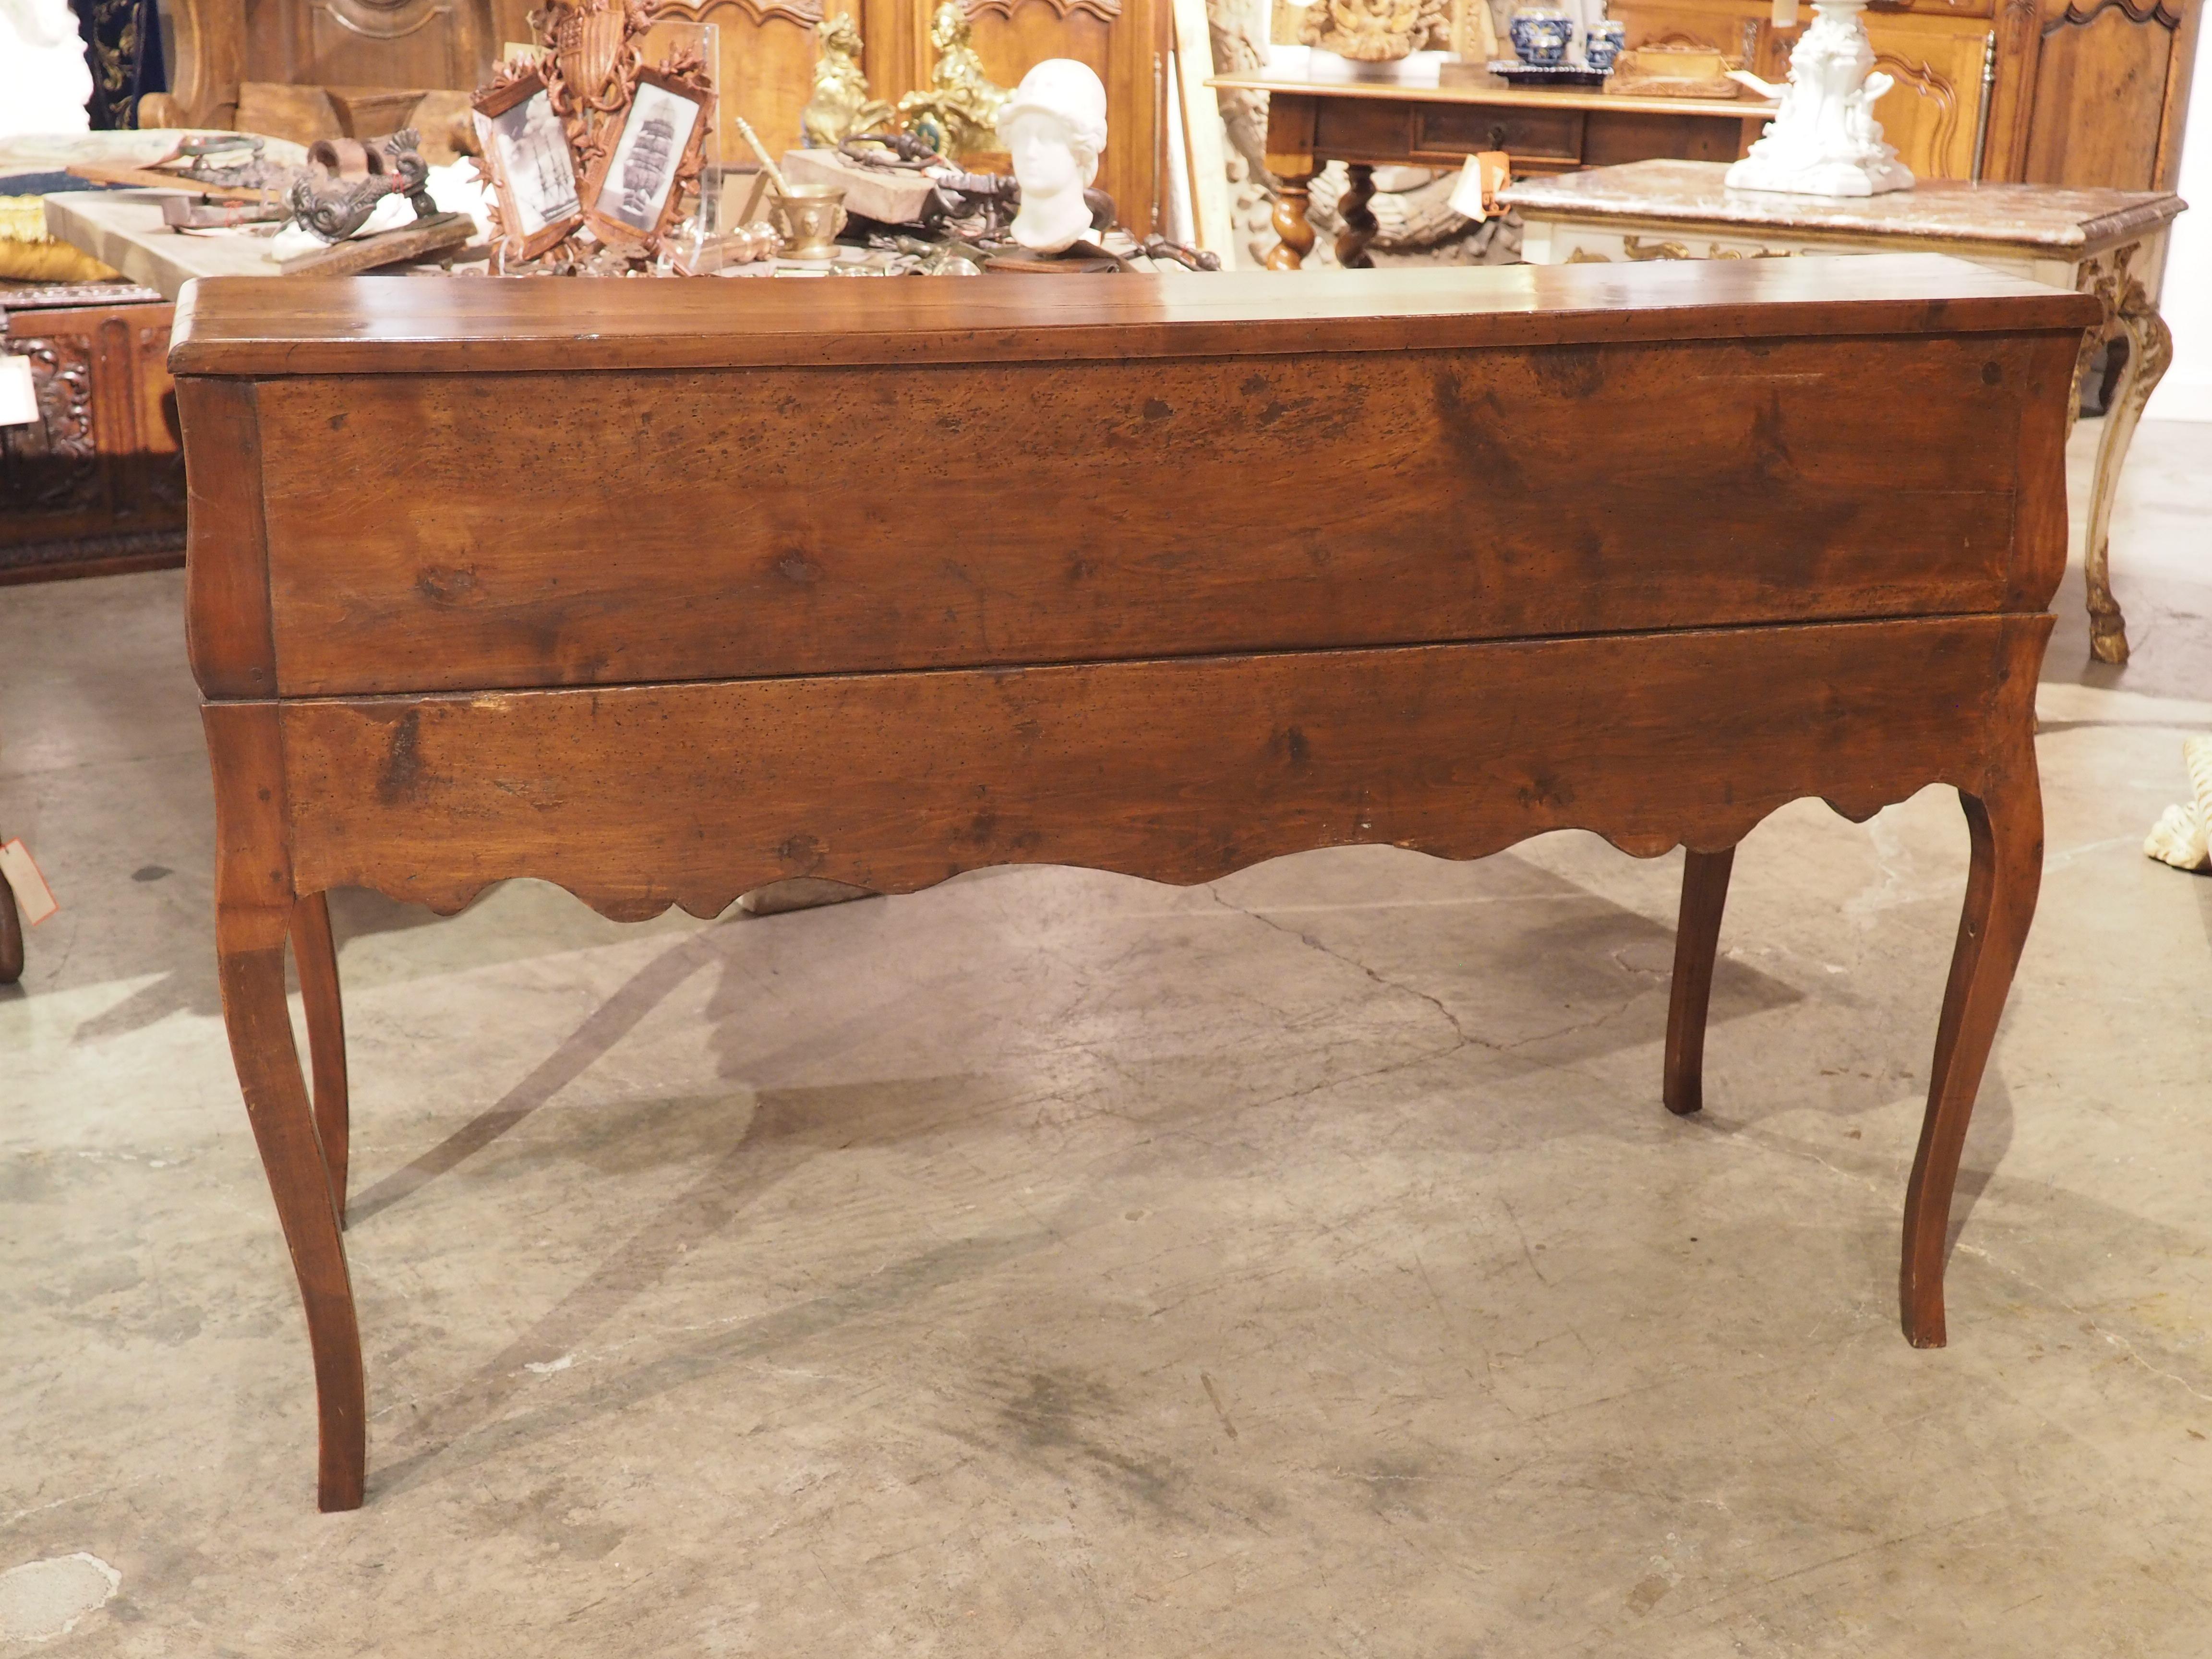 Larger than the typical Louis XV writing desk, this cherrywood bureau de pente was hand-carved in France during the late 1700’s, just after the period ended. This type of desk went by several names, including bureau dos d’âne and secrétaire à dessus